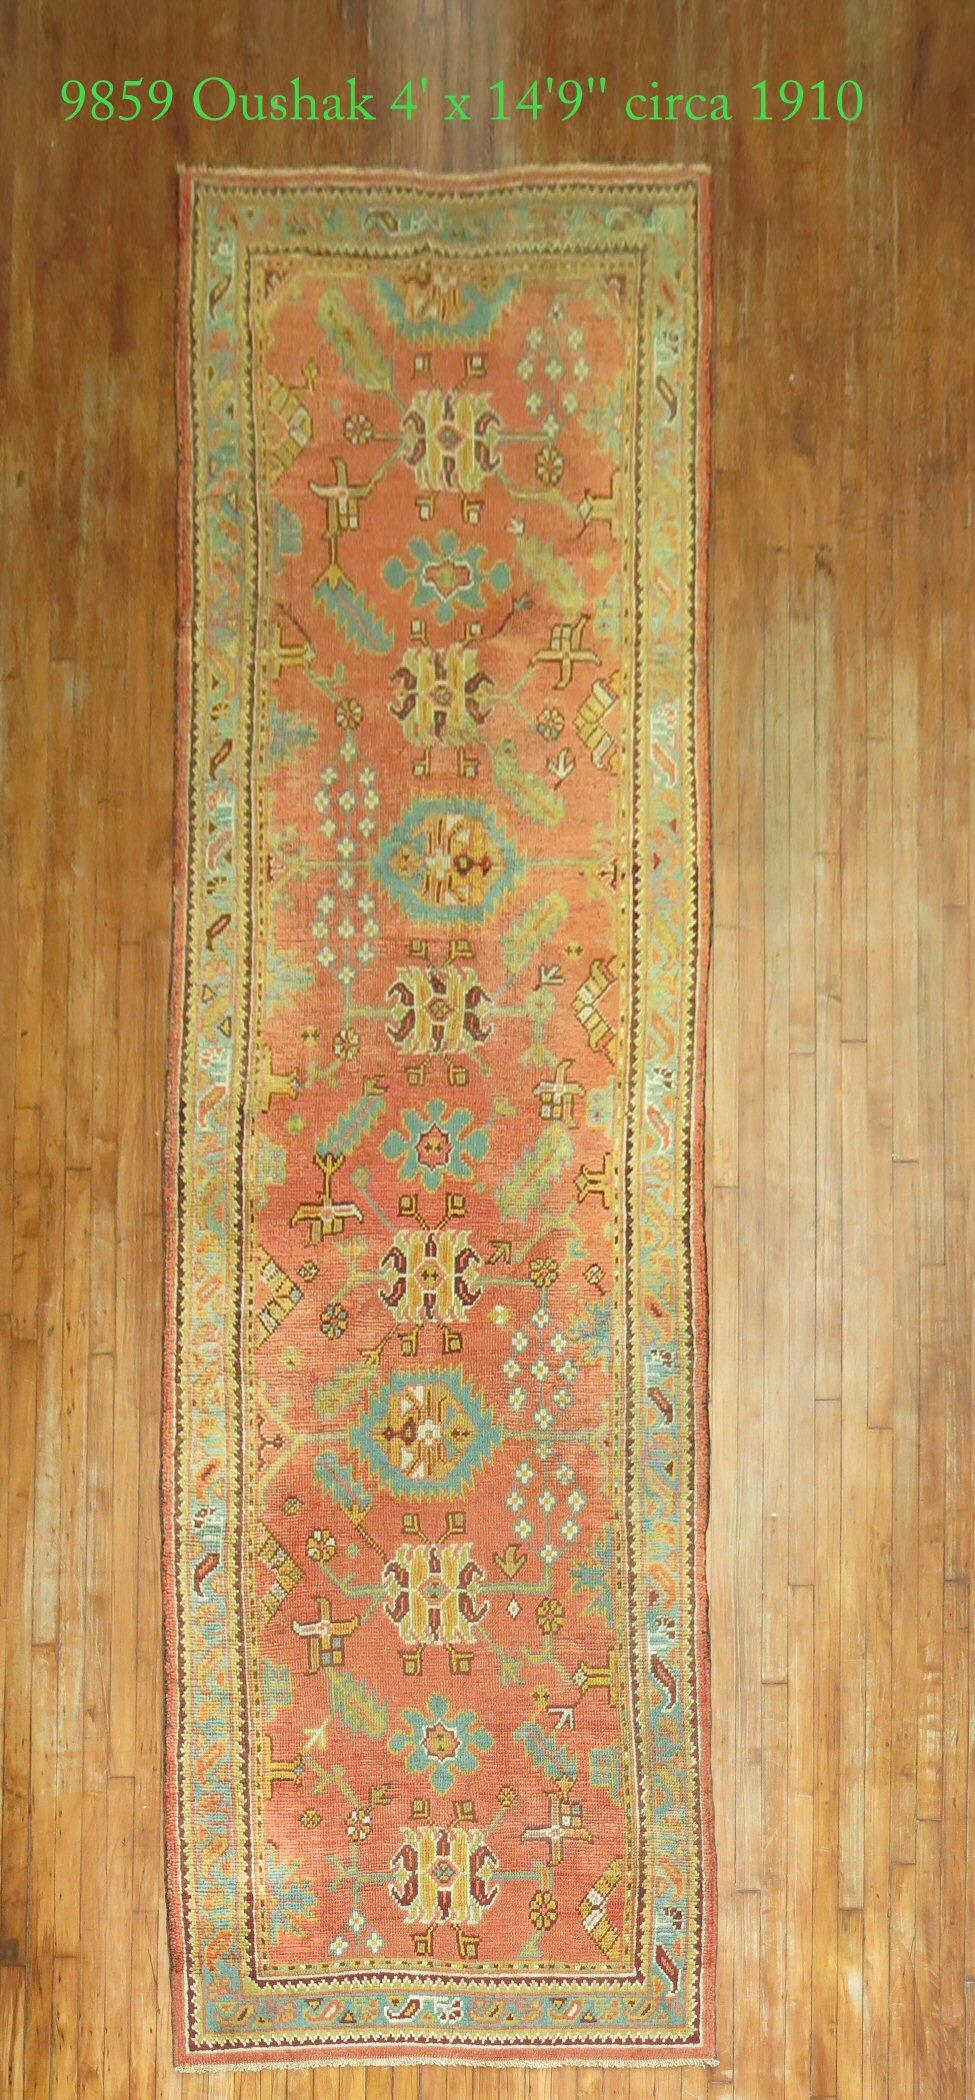 An early 20th-century antique Oushak runner featuring a pumpkin orange field, the green border with an all-over design attributed to the Arts & Crafts movement.

Measures: 4'”x 14'9”.